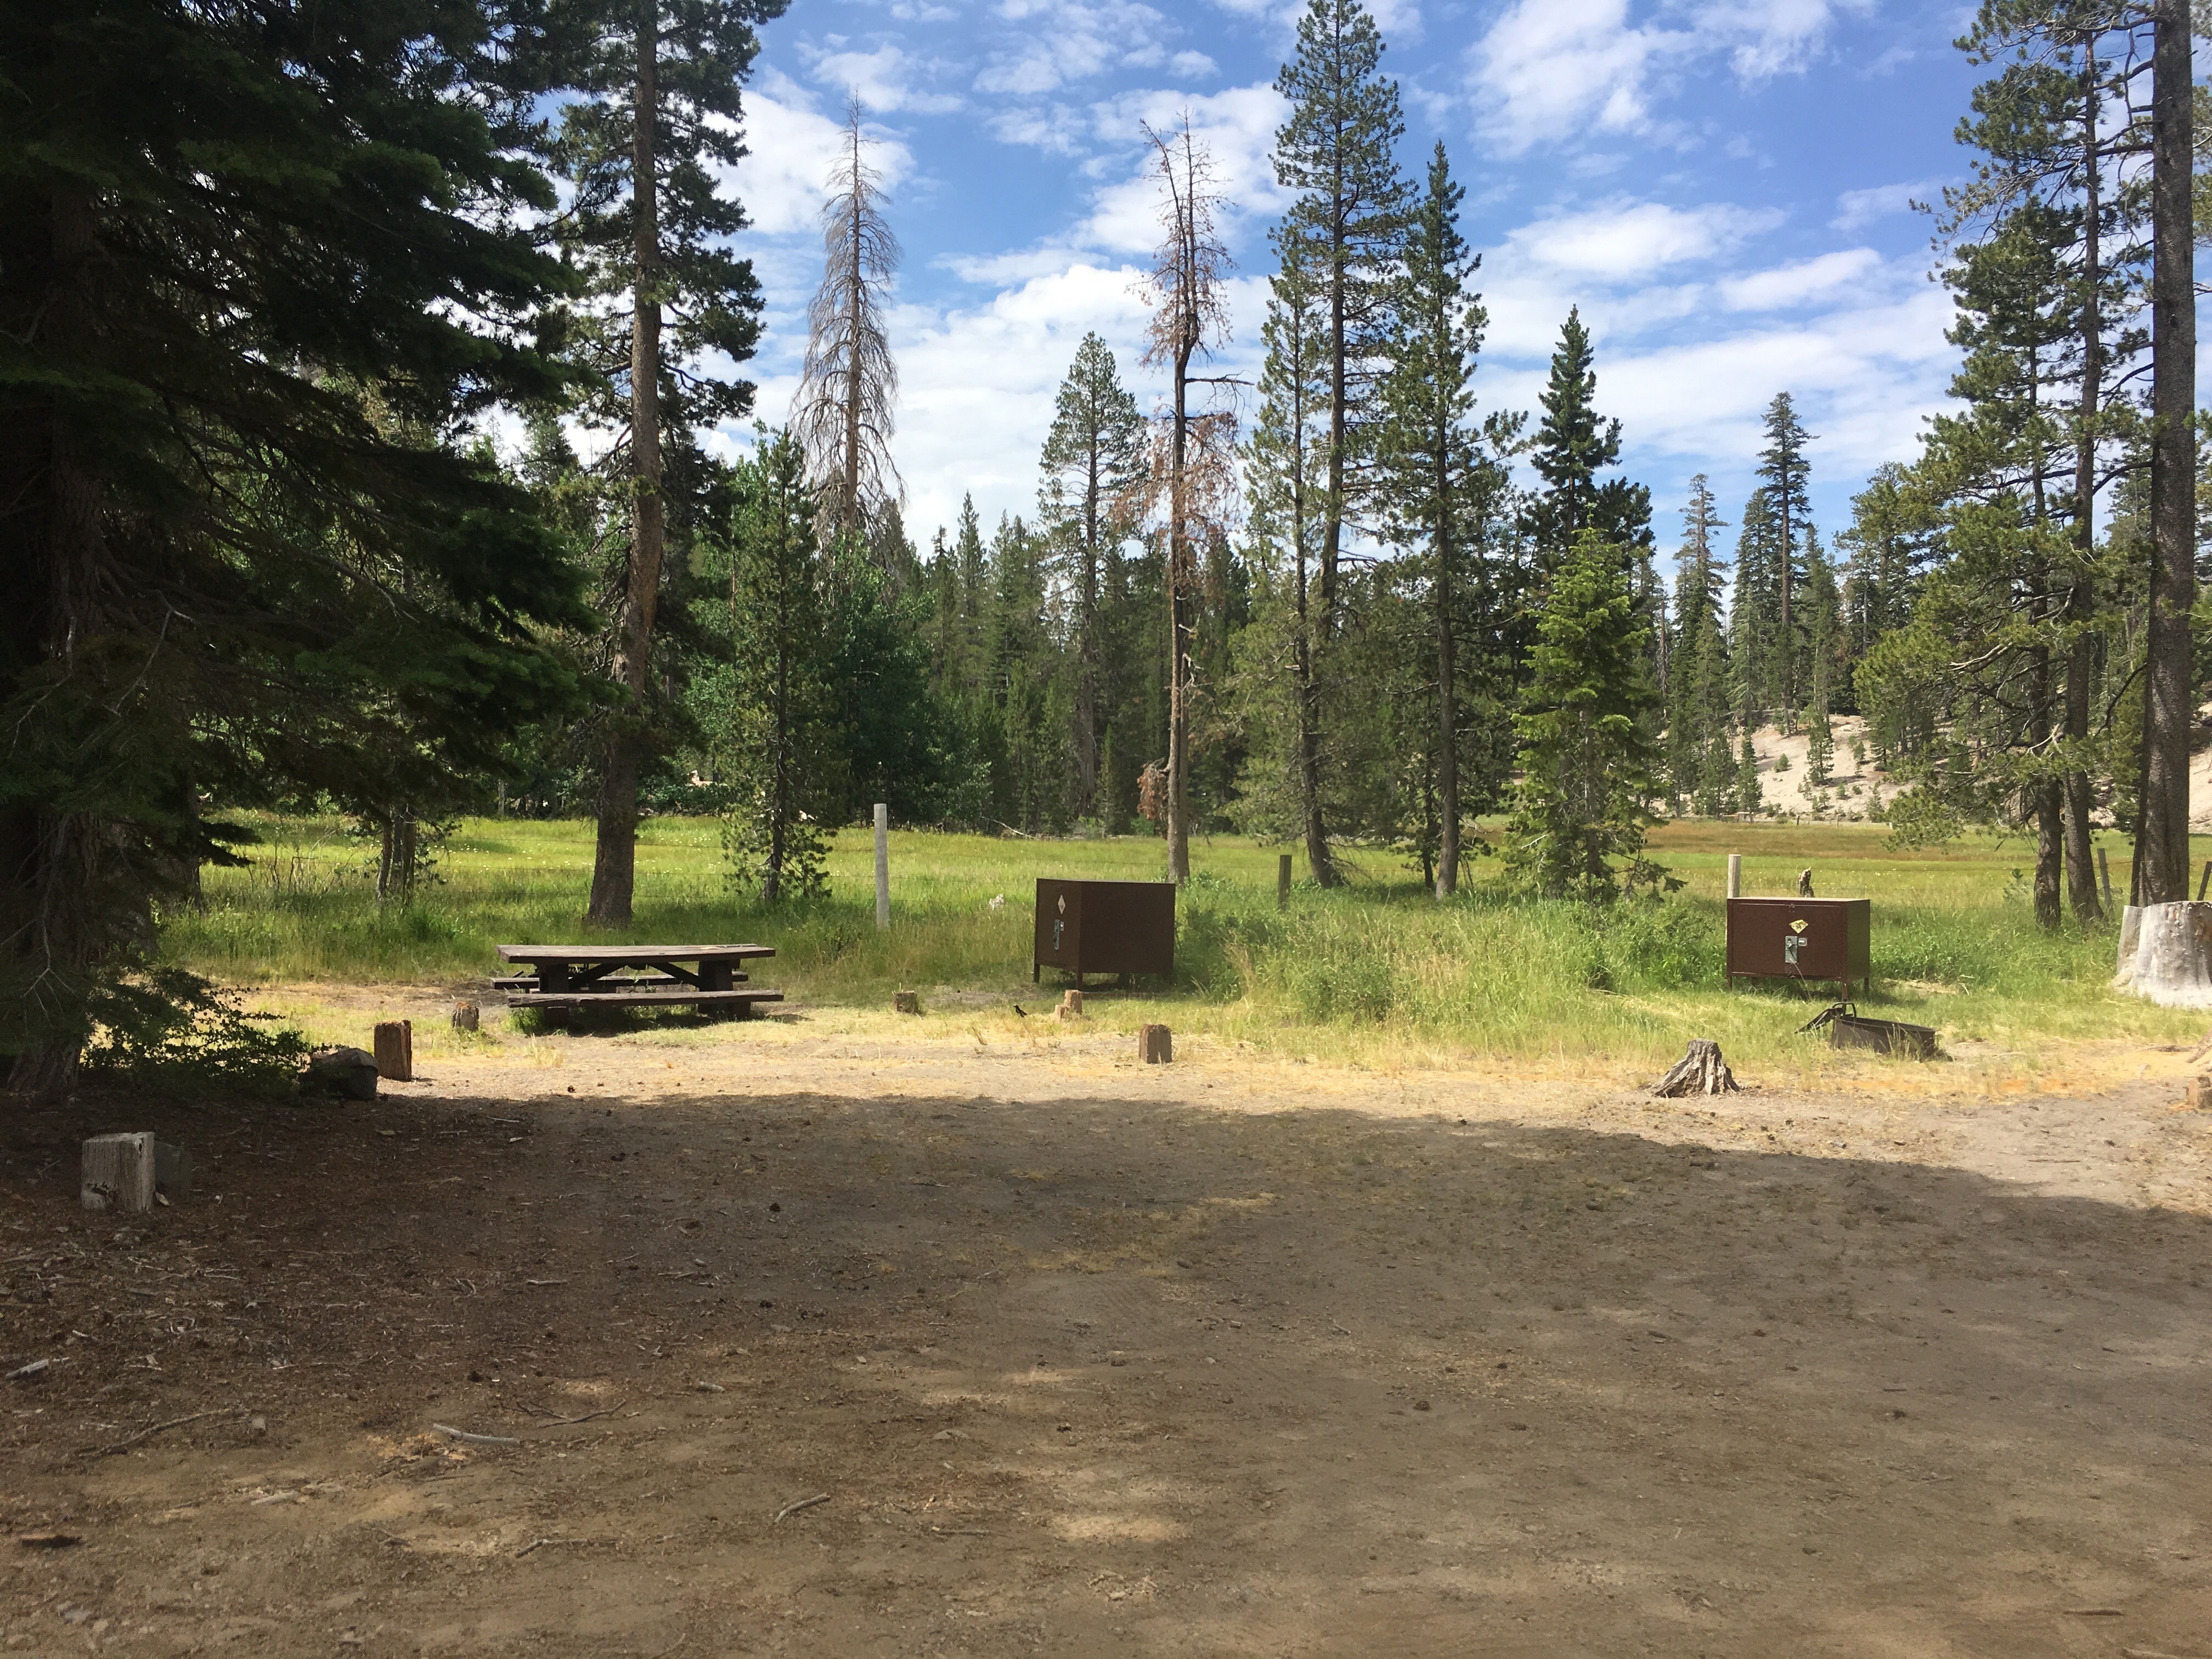 Camper submitted image from Reds Meadow Campground - 2